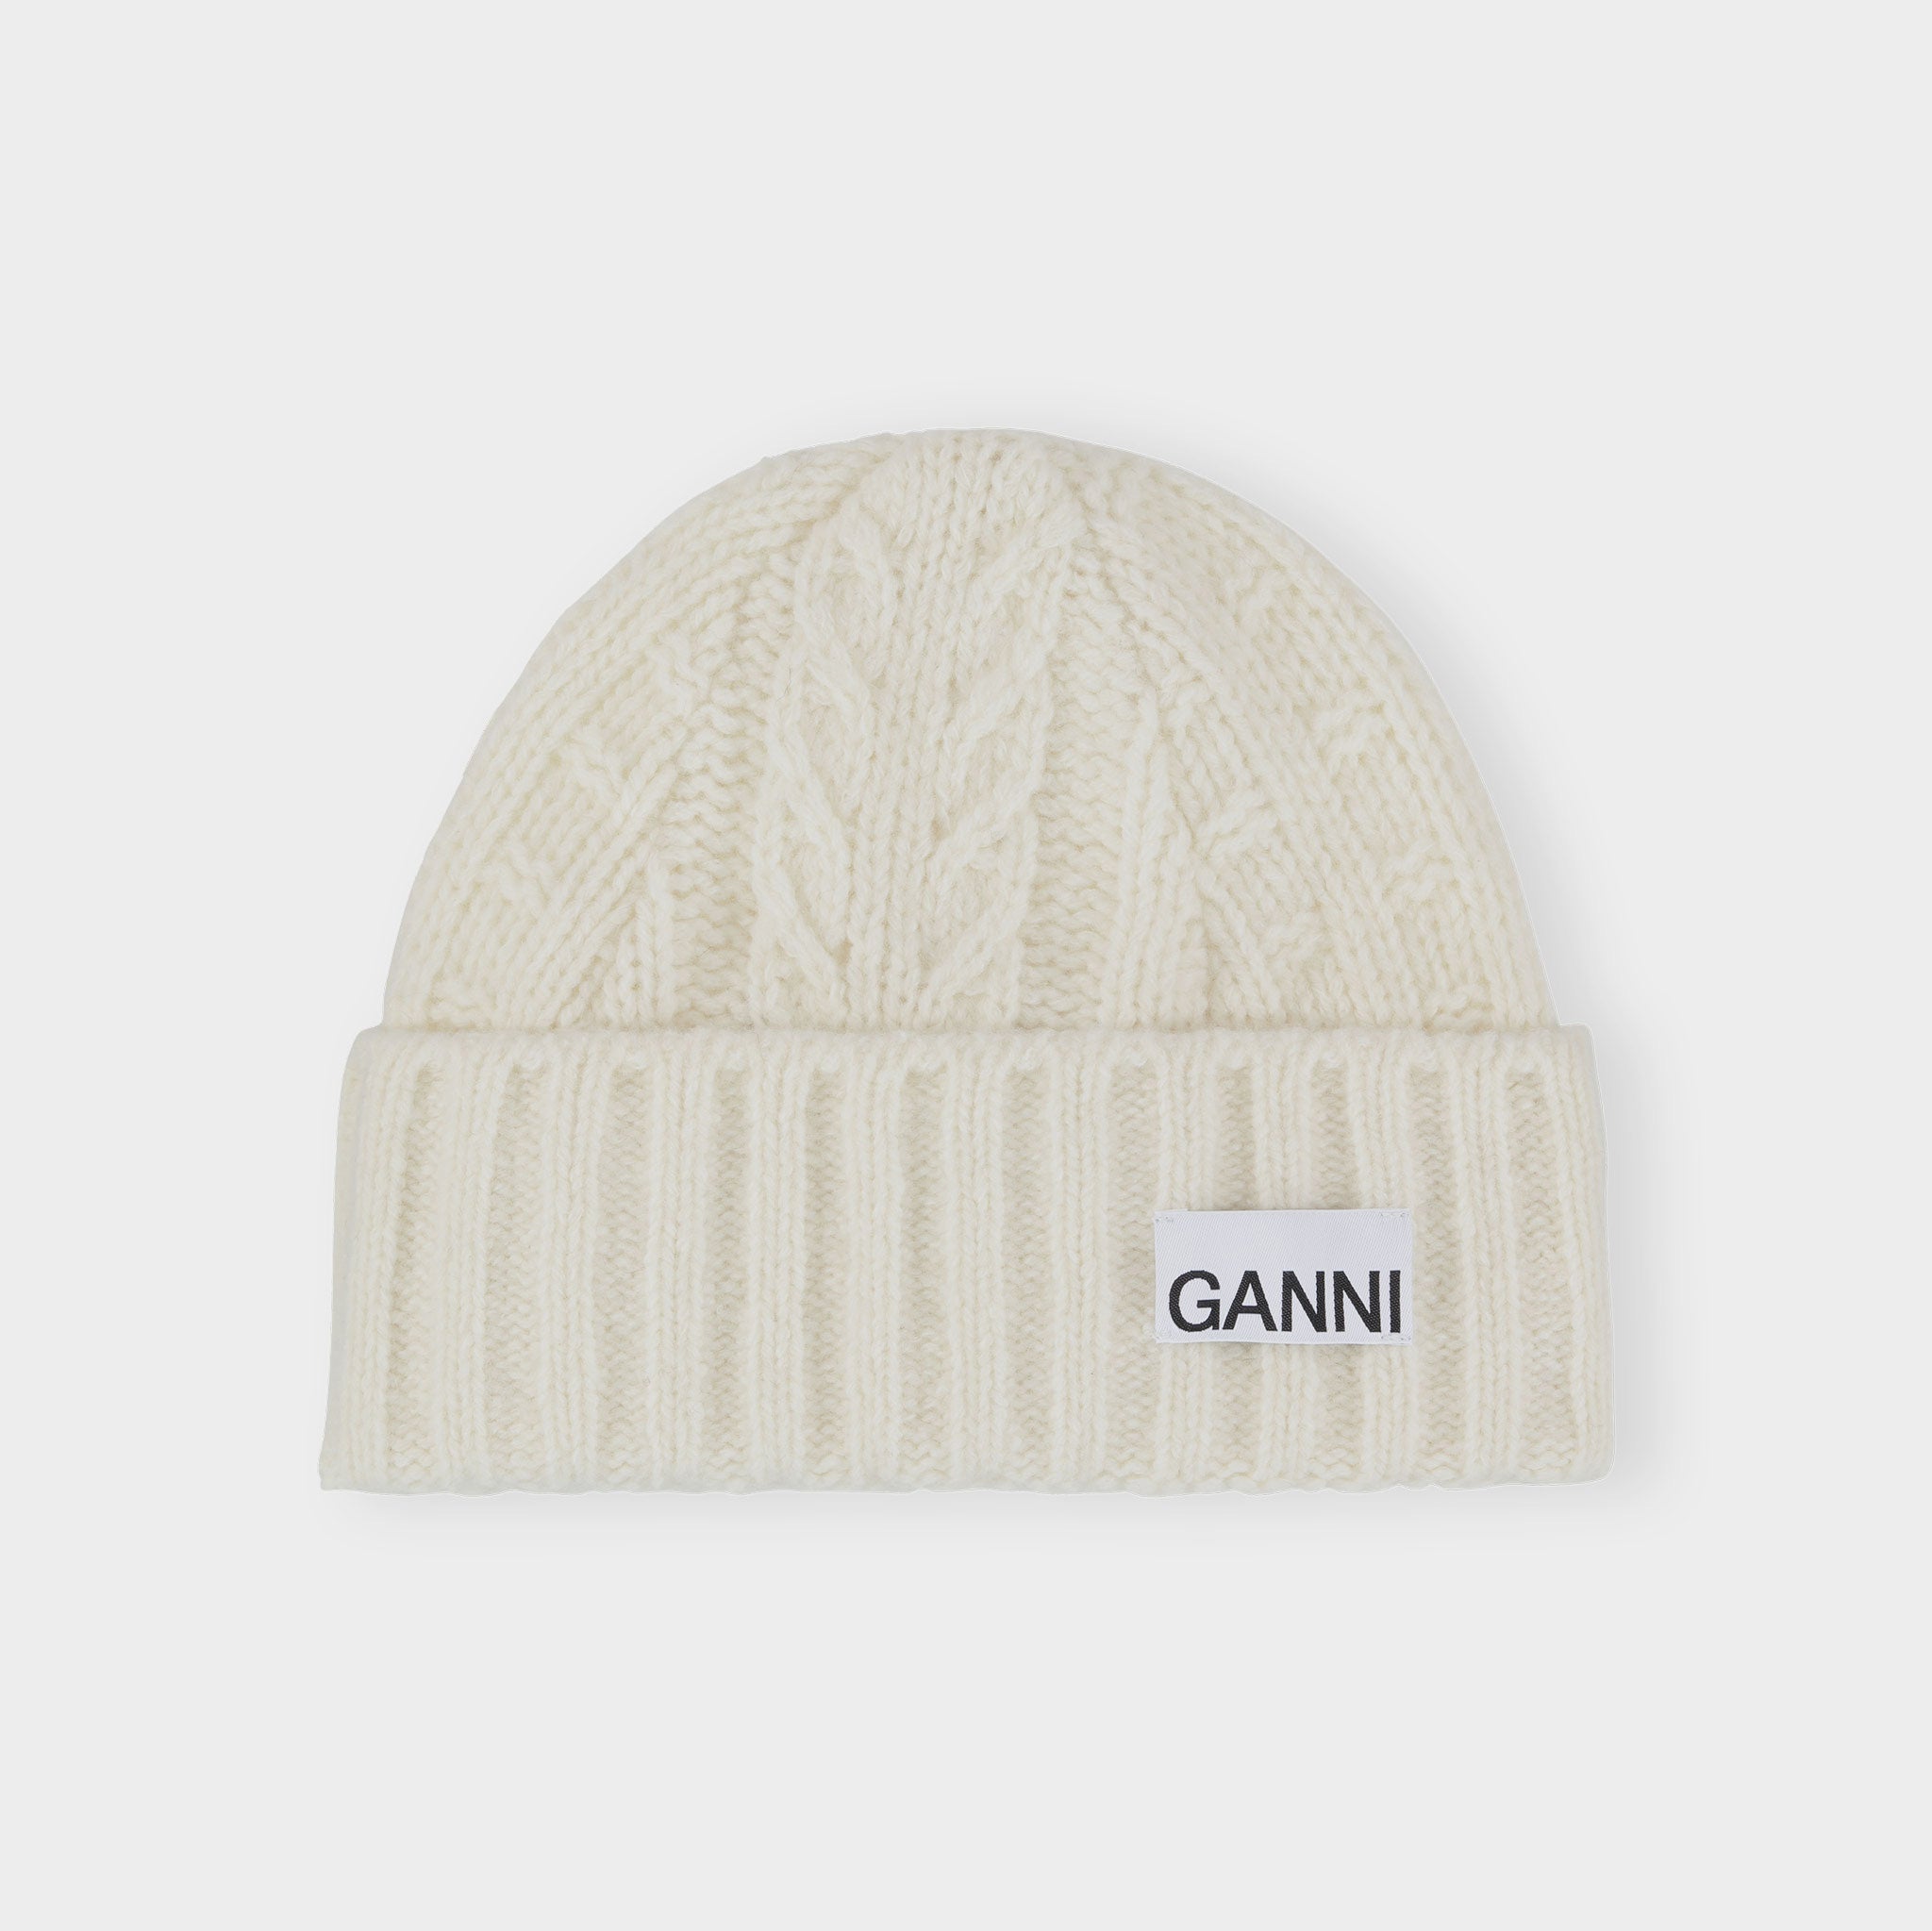 Flat photo of the classic white cable knit beanie from GANNI.